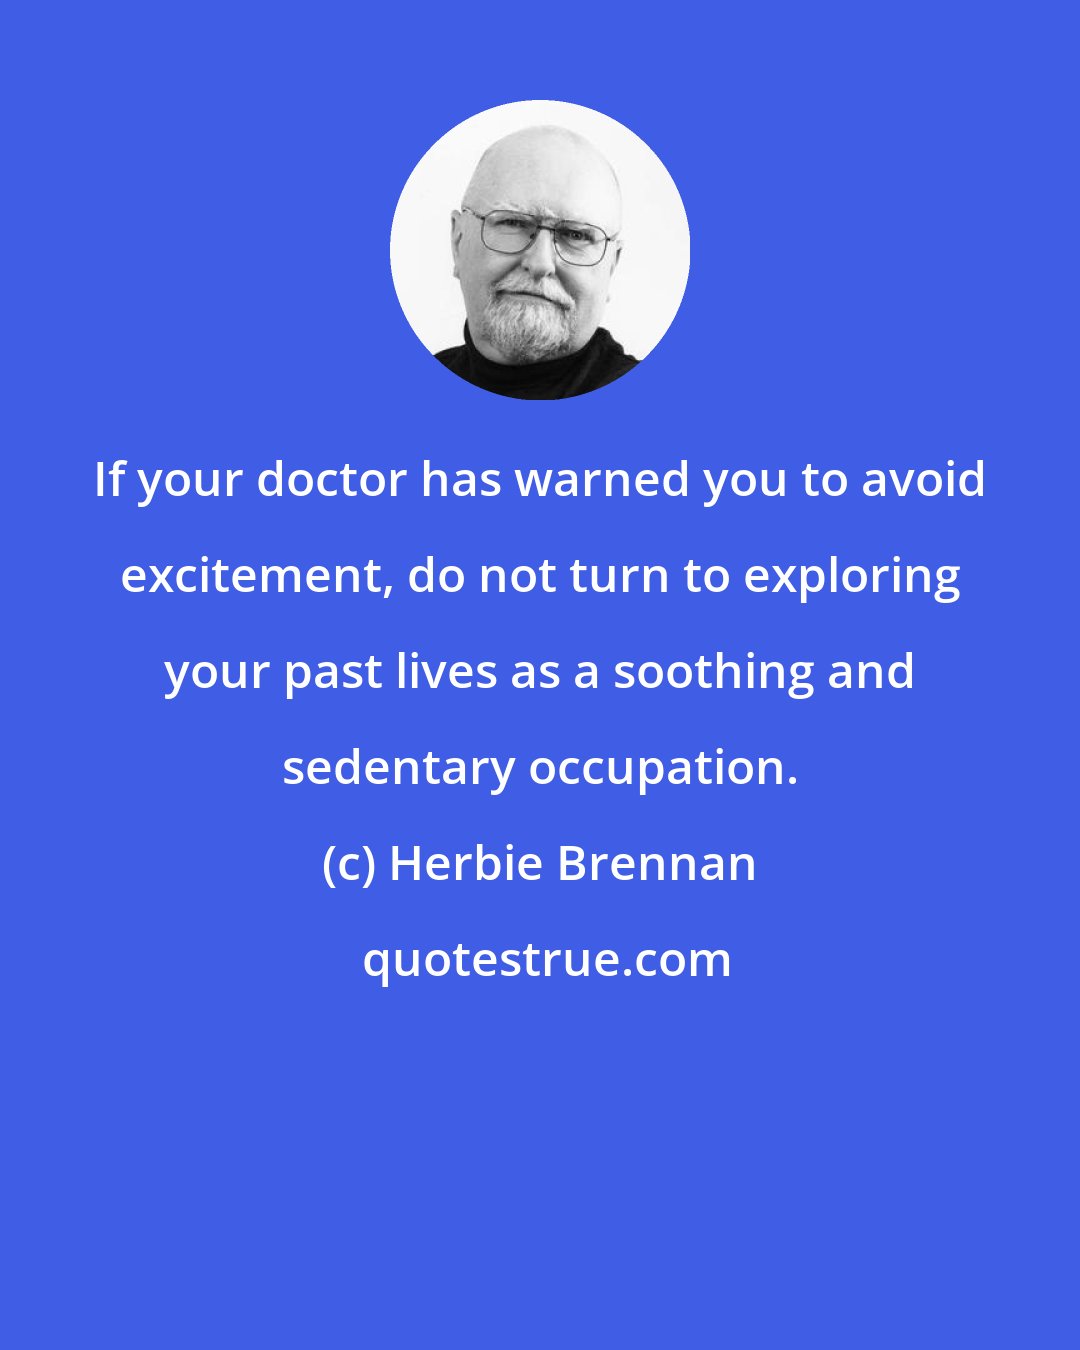 Herbie Brennan: If your doctor has warned you to avoid excitement, do not turn to exploring your past lives as a soothing and sedentary occupation.